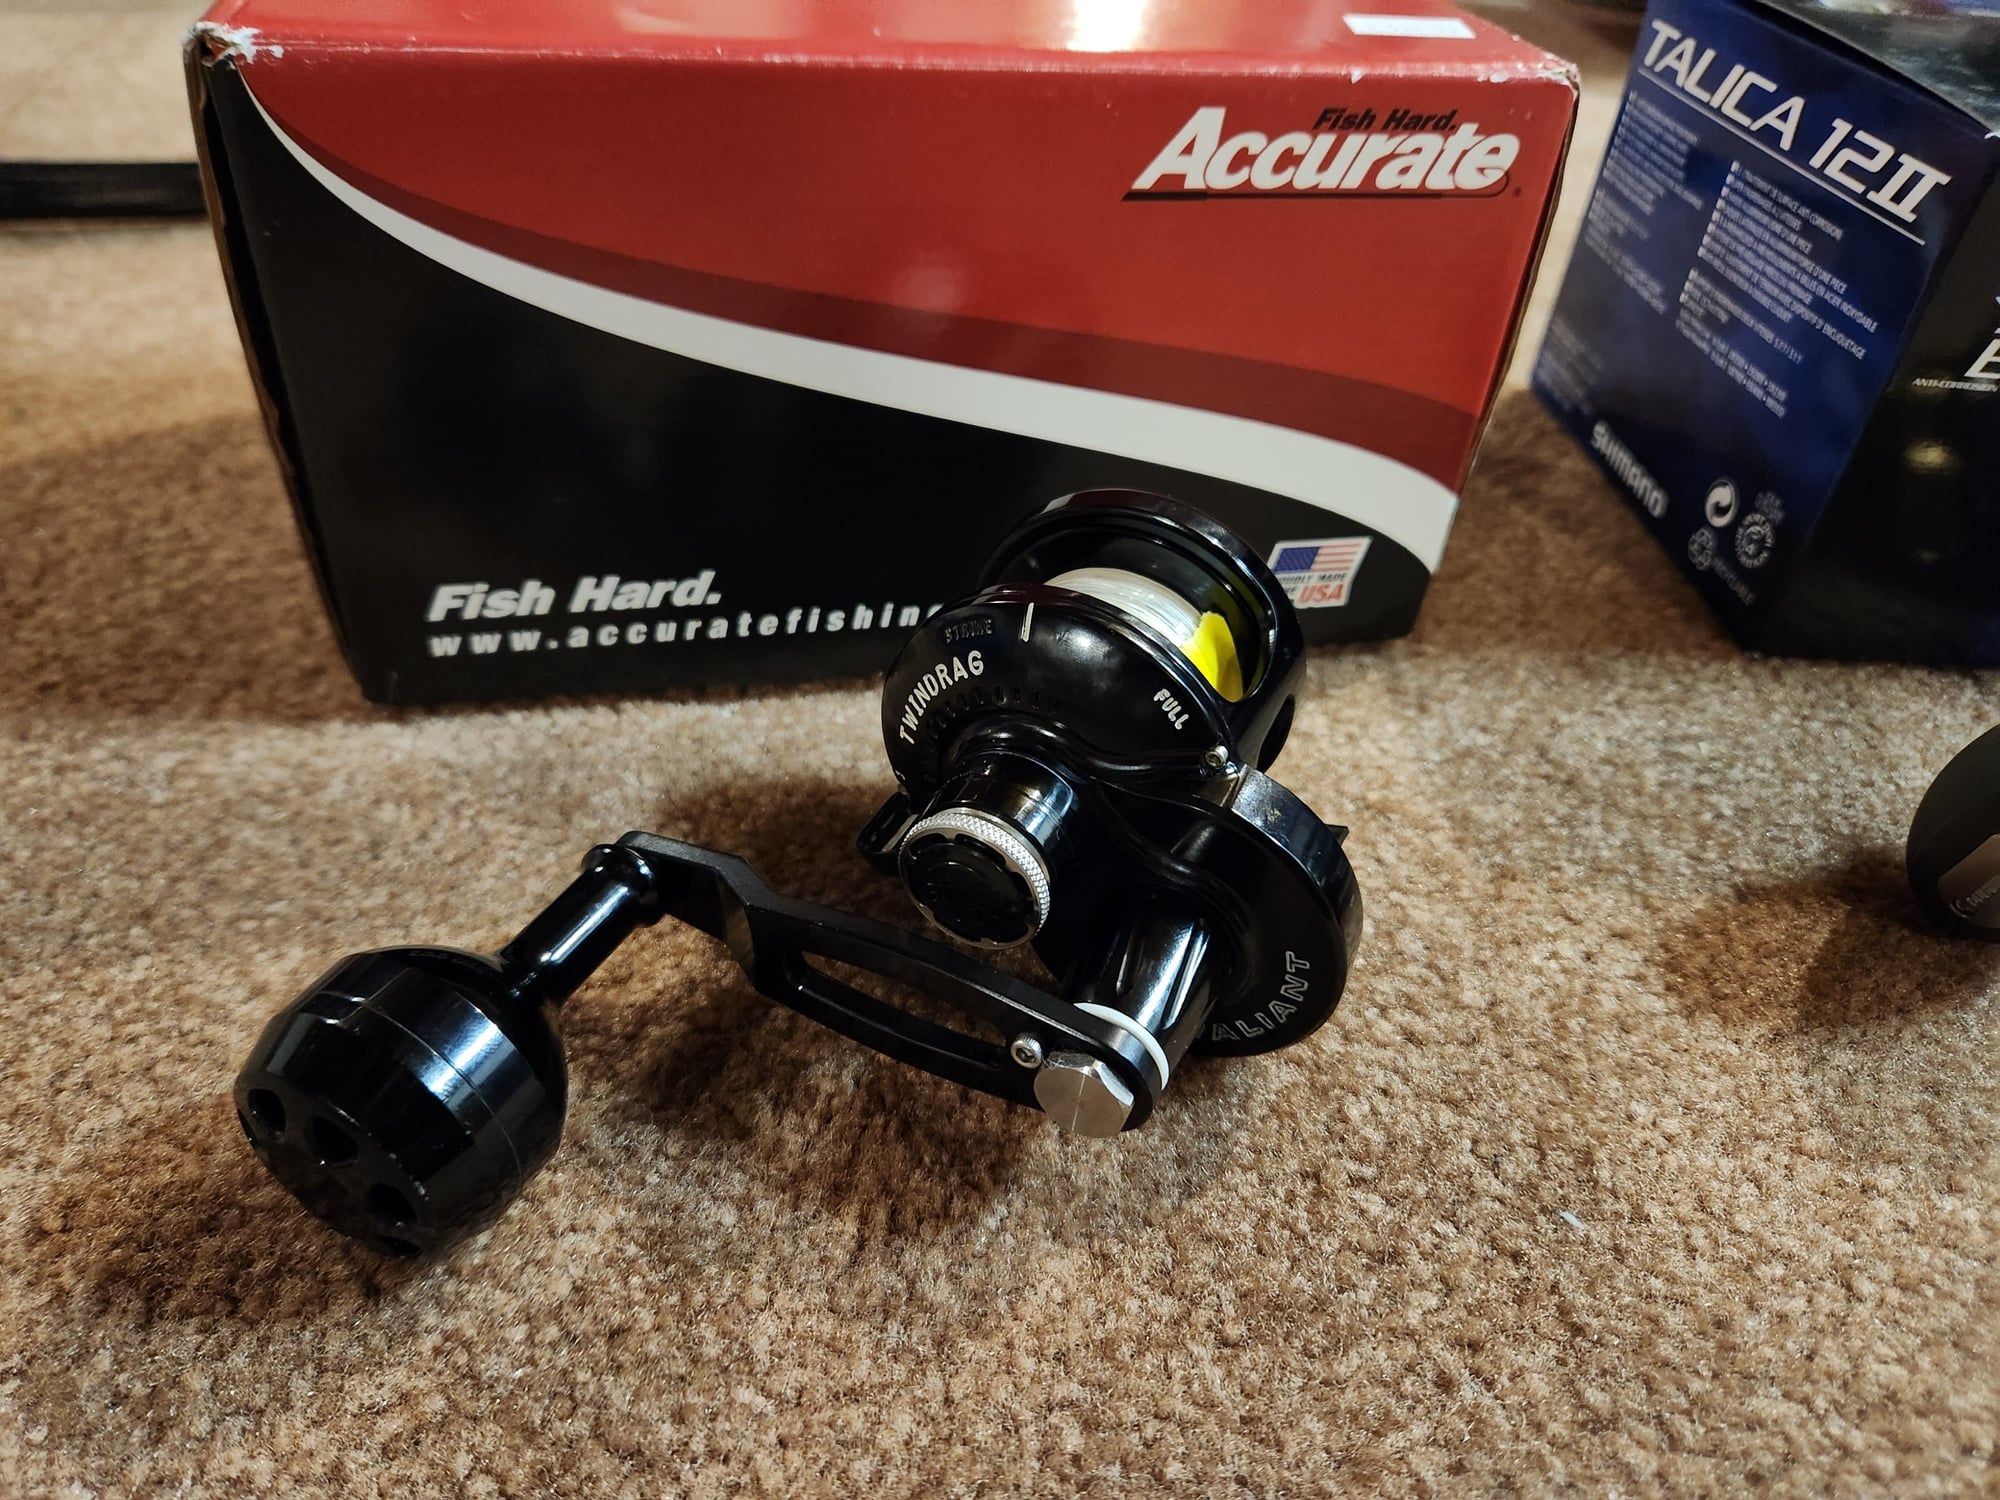 Shimano, Accurate reels, g loomis and Phenix rods - The Hull Truth